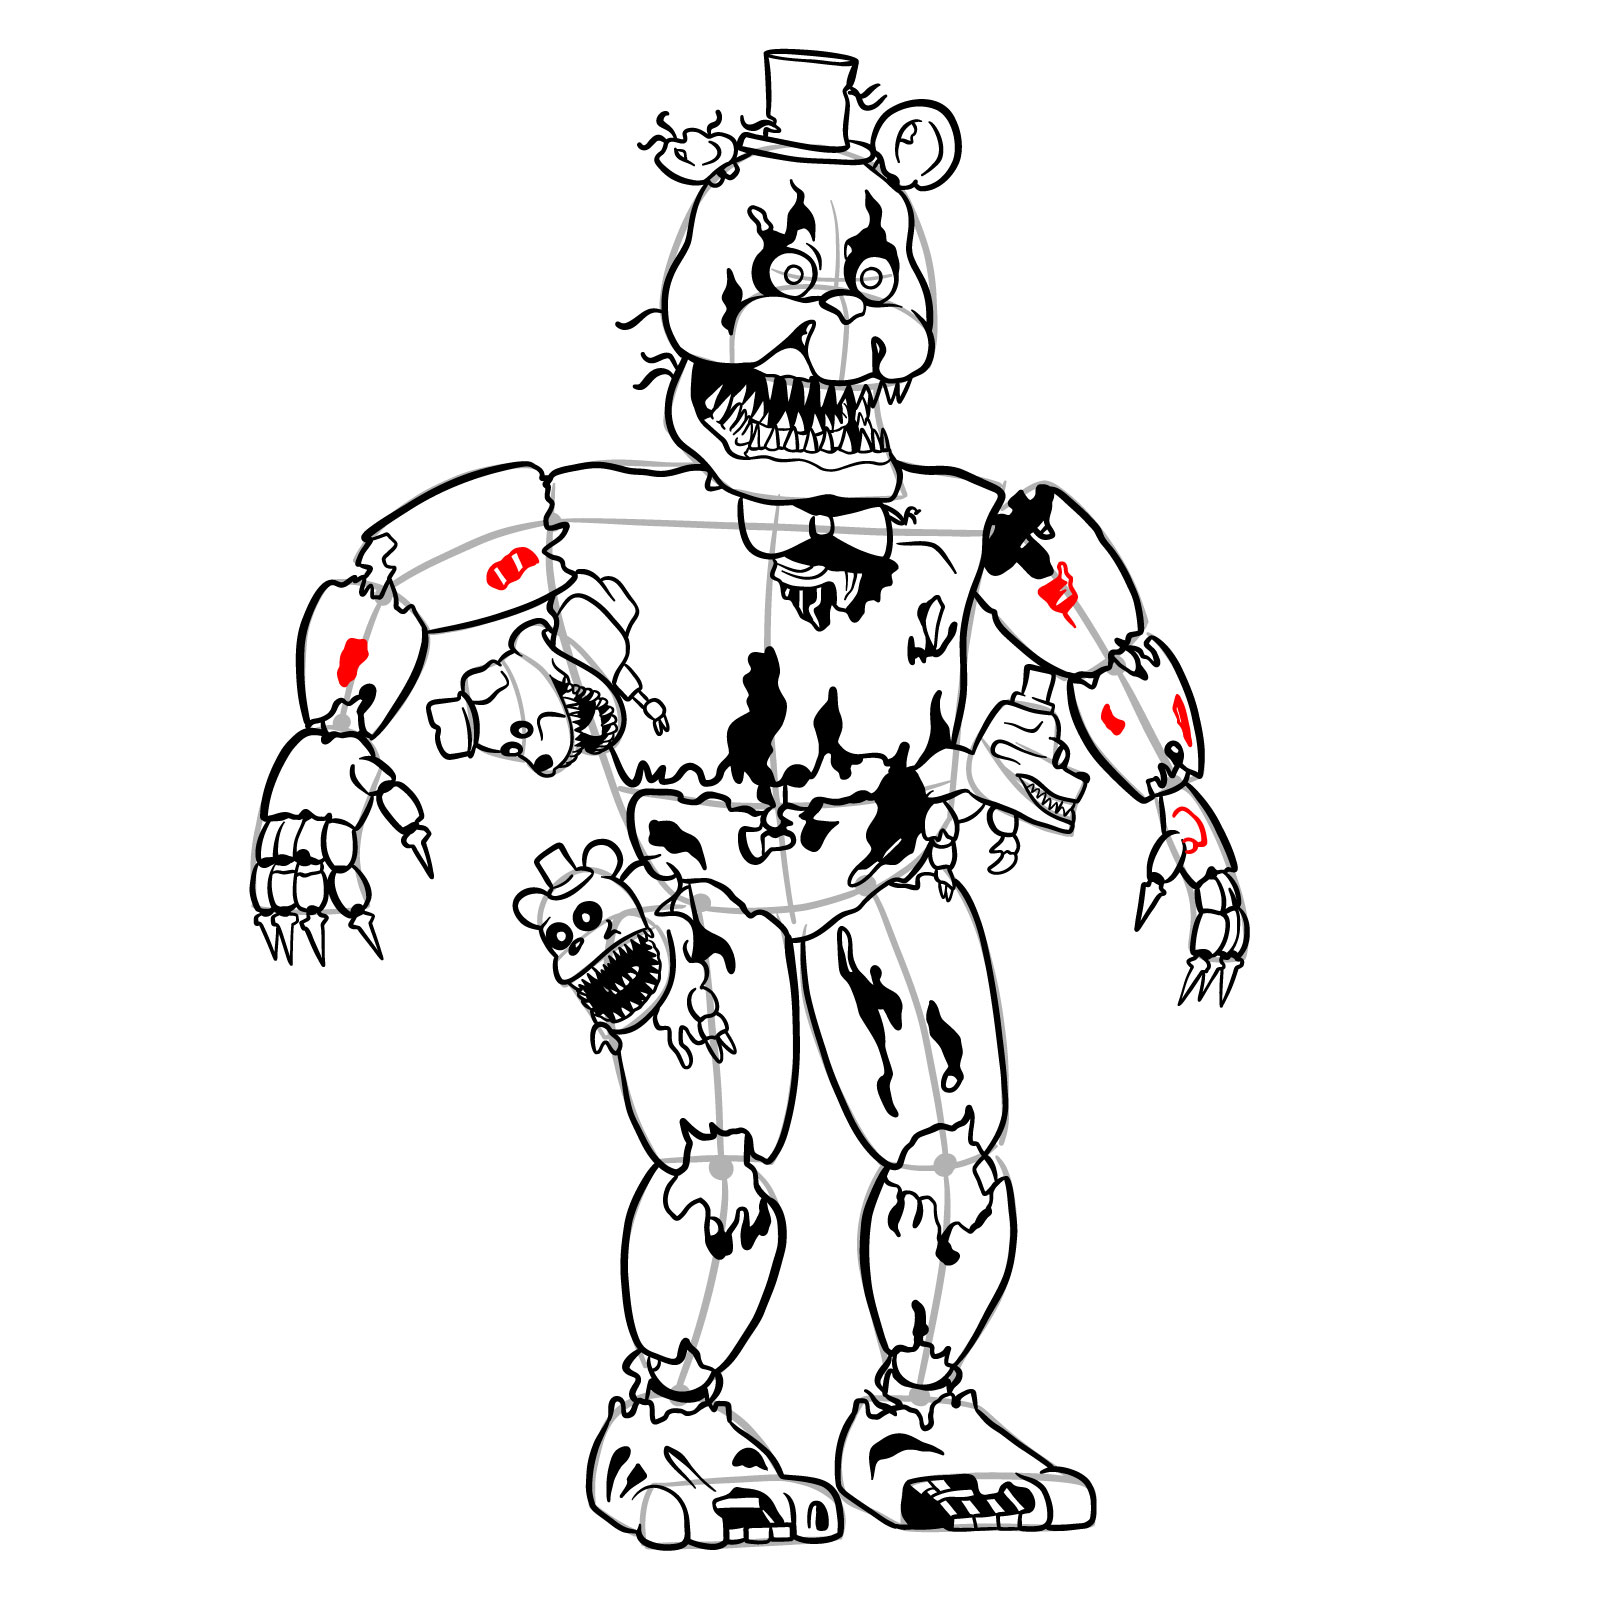 How to draw Nightmare Freddy - step 51